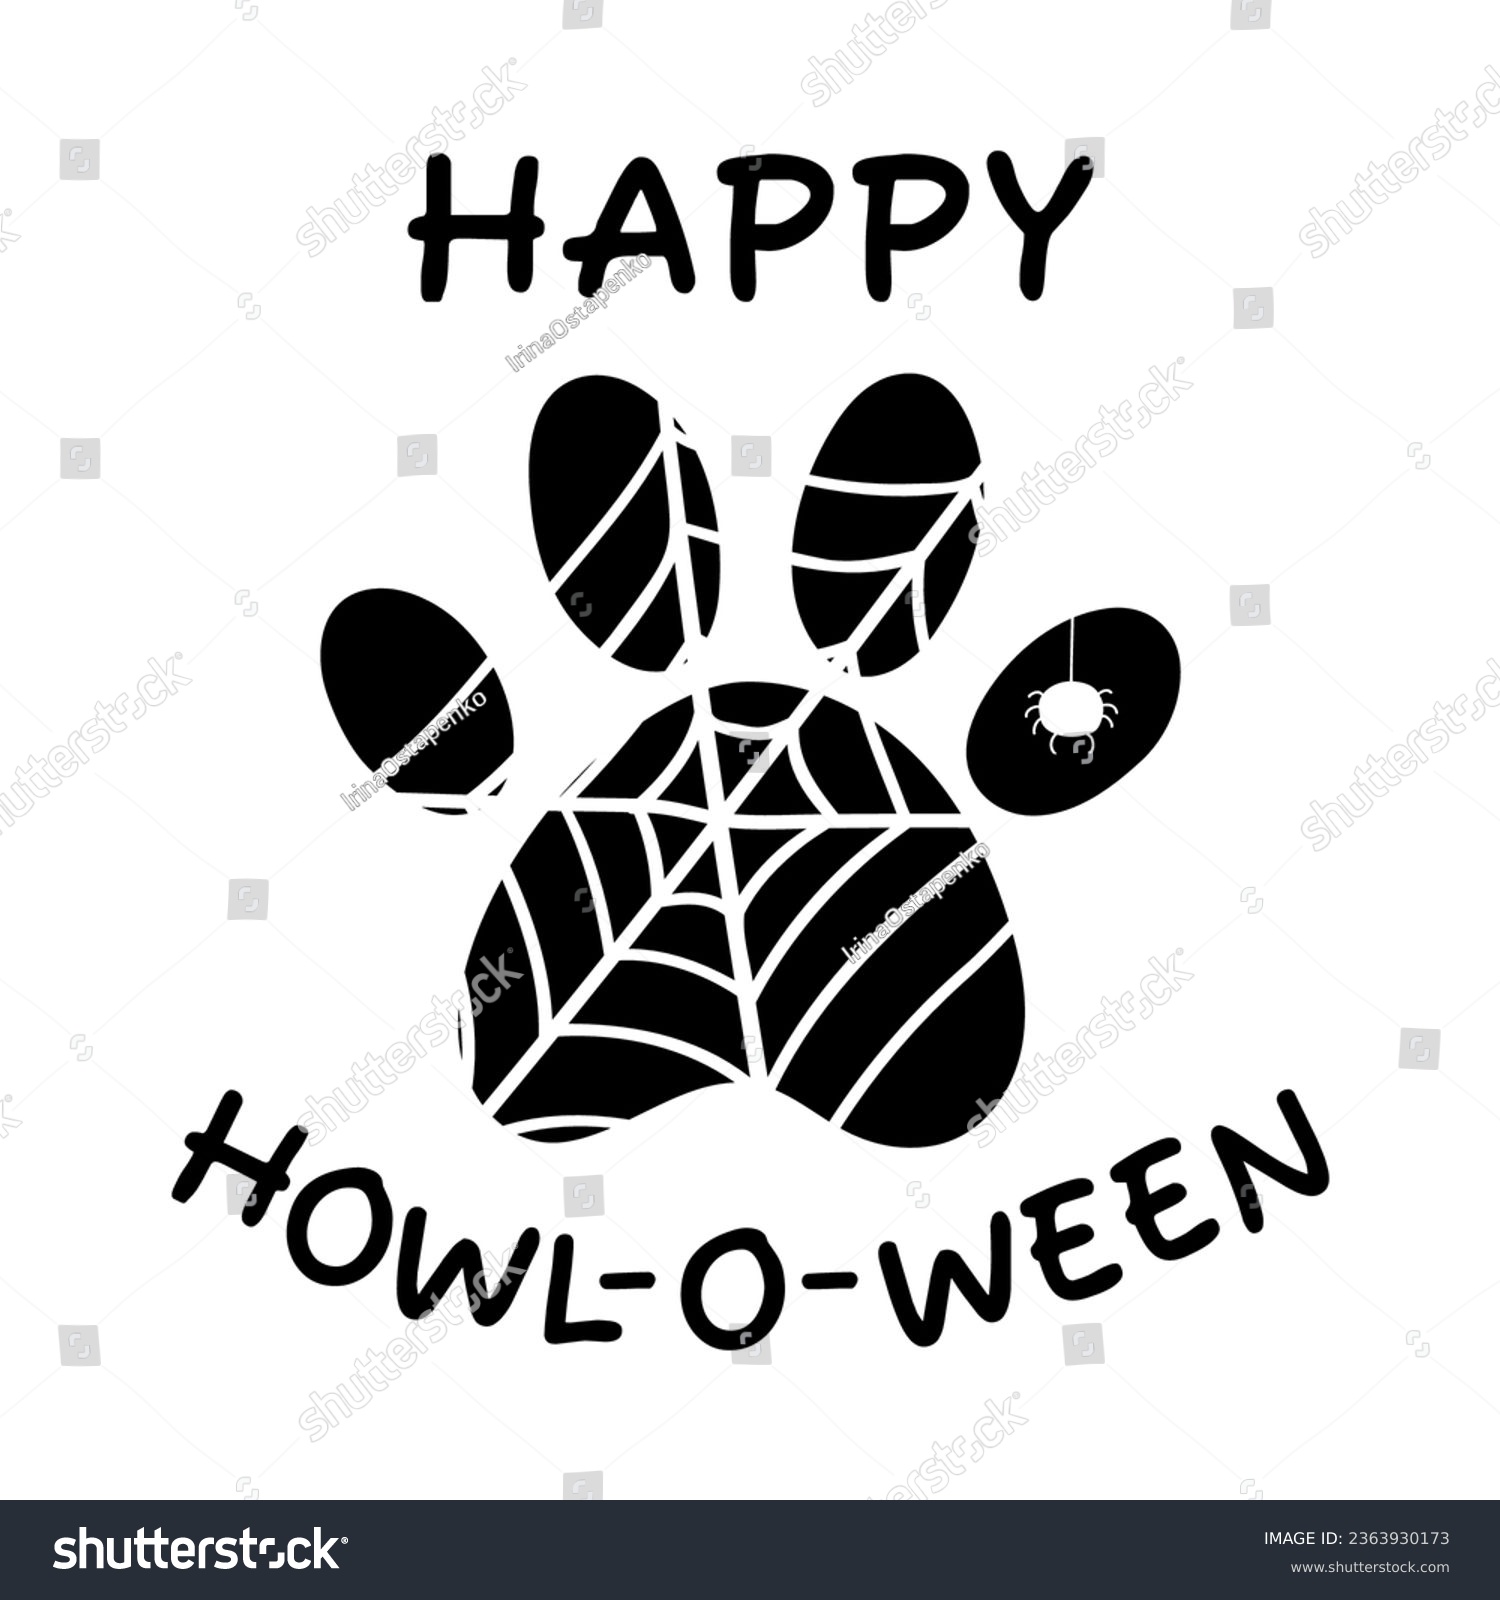 SVG of HAPPY HOWL-O-WEEN. Dog paw with spider web. Happy Halloween. Paws prints dog. Love dogs. Fall, autumn, Thanksgiving, Halloween element for design.Isolated on white background. svg